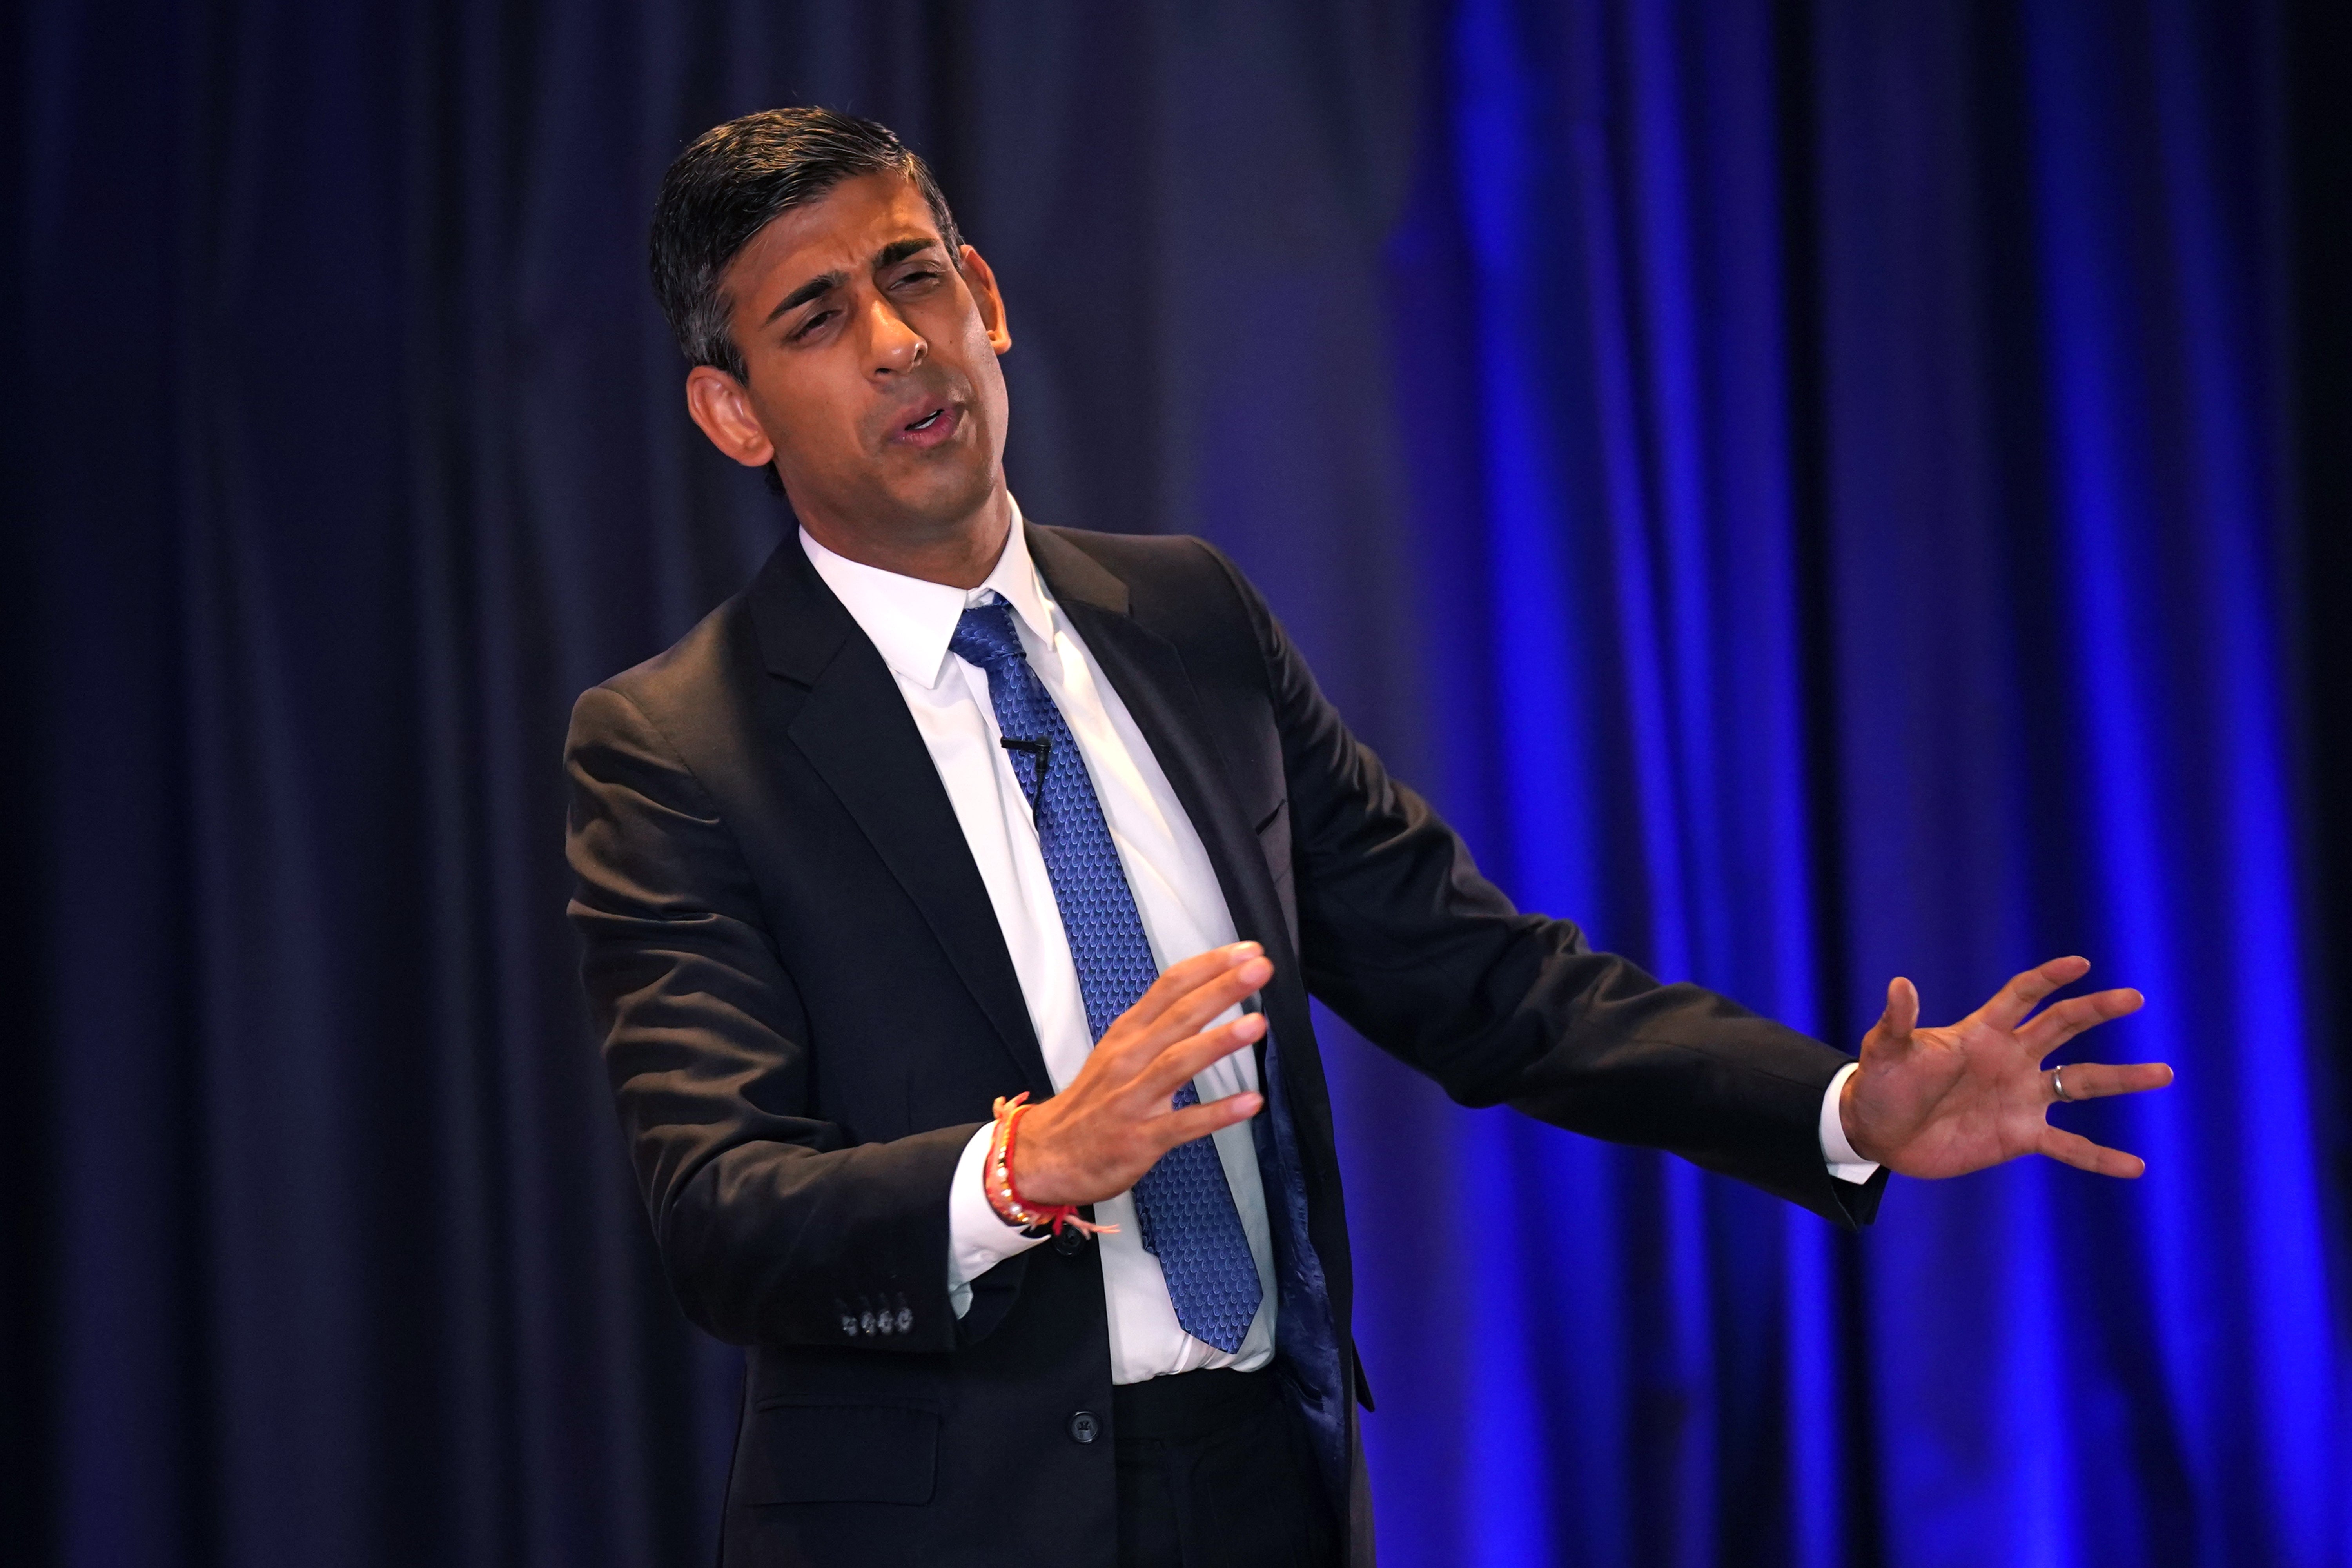 Rishi Sunak is hoping to turnaround his fortunes in the Tory leadership contest